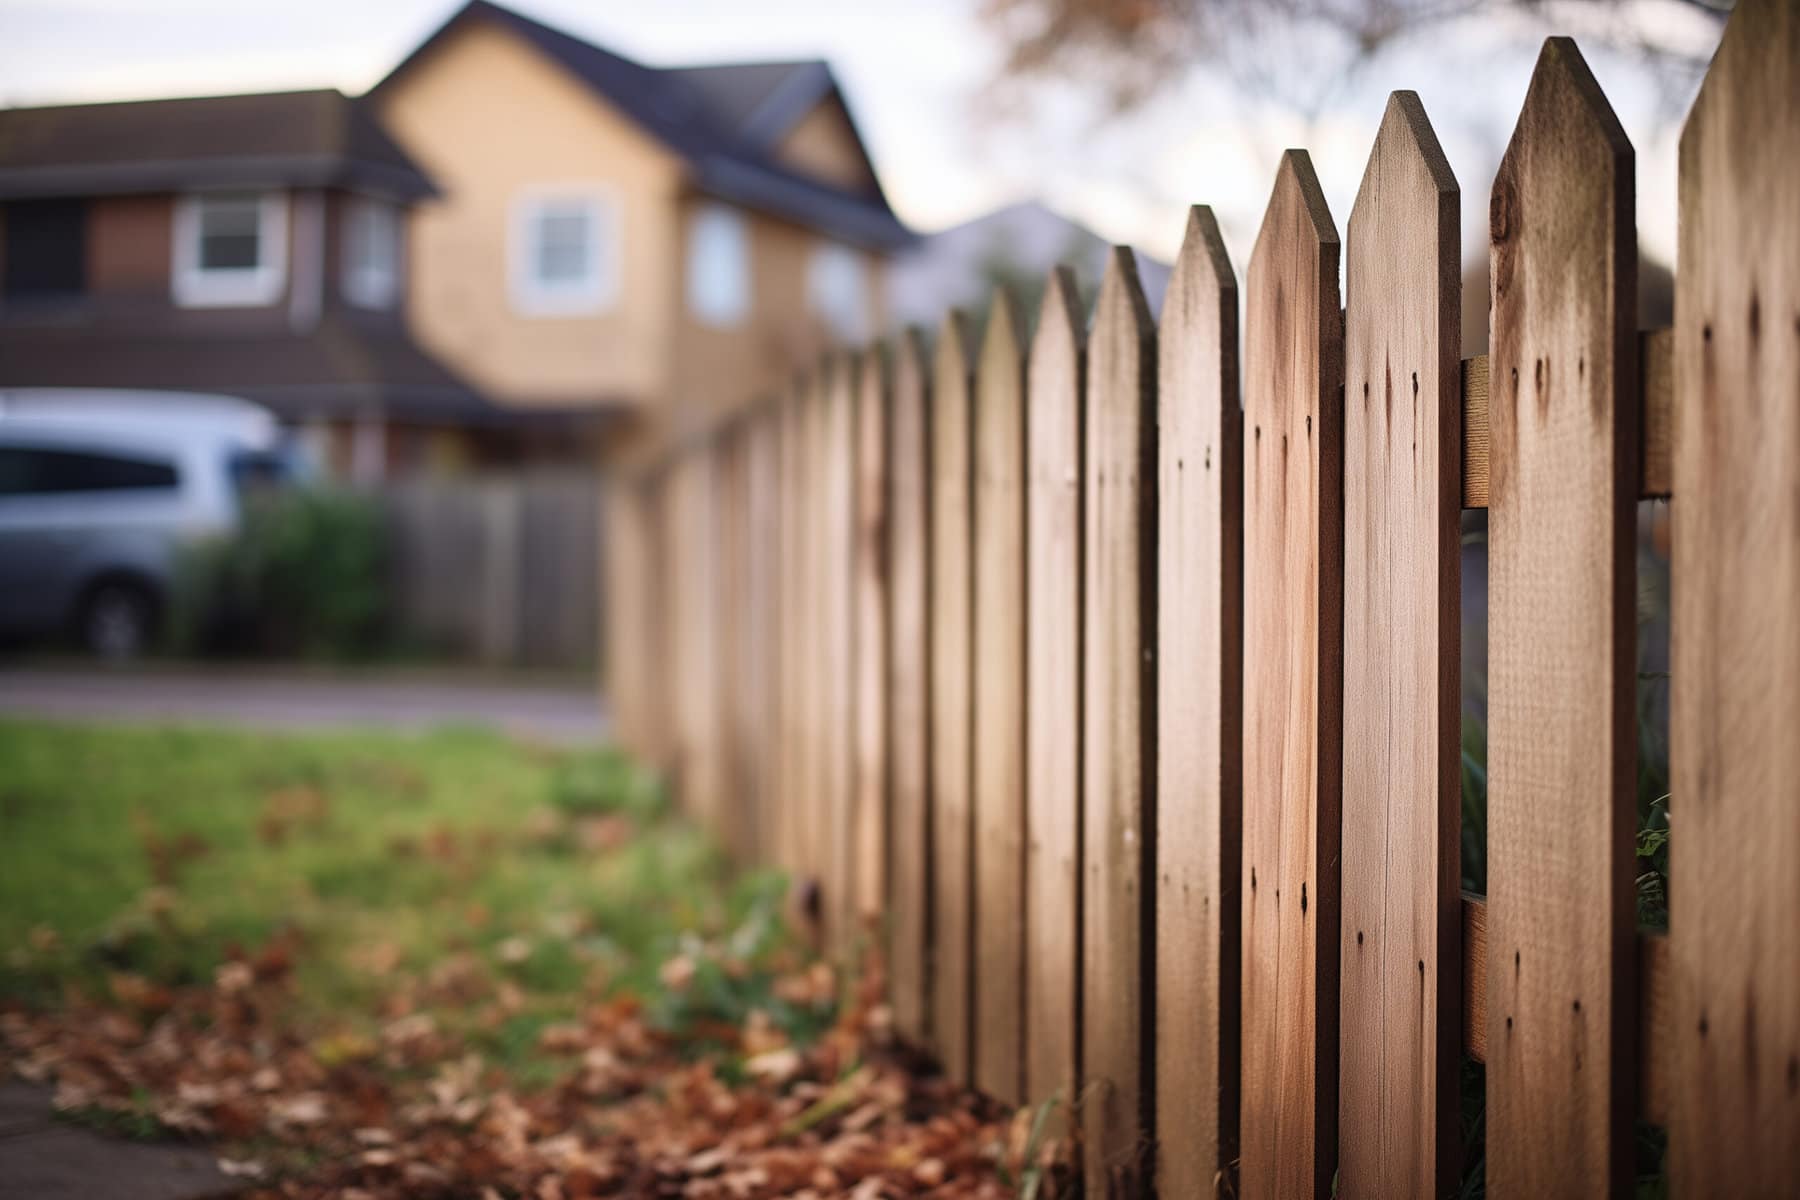 The Rome Fence Company Launches "Fence Safety Awareness" Campaign to Promote Safe Fencing Practices